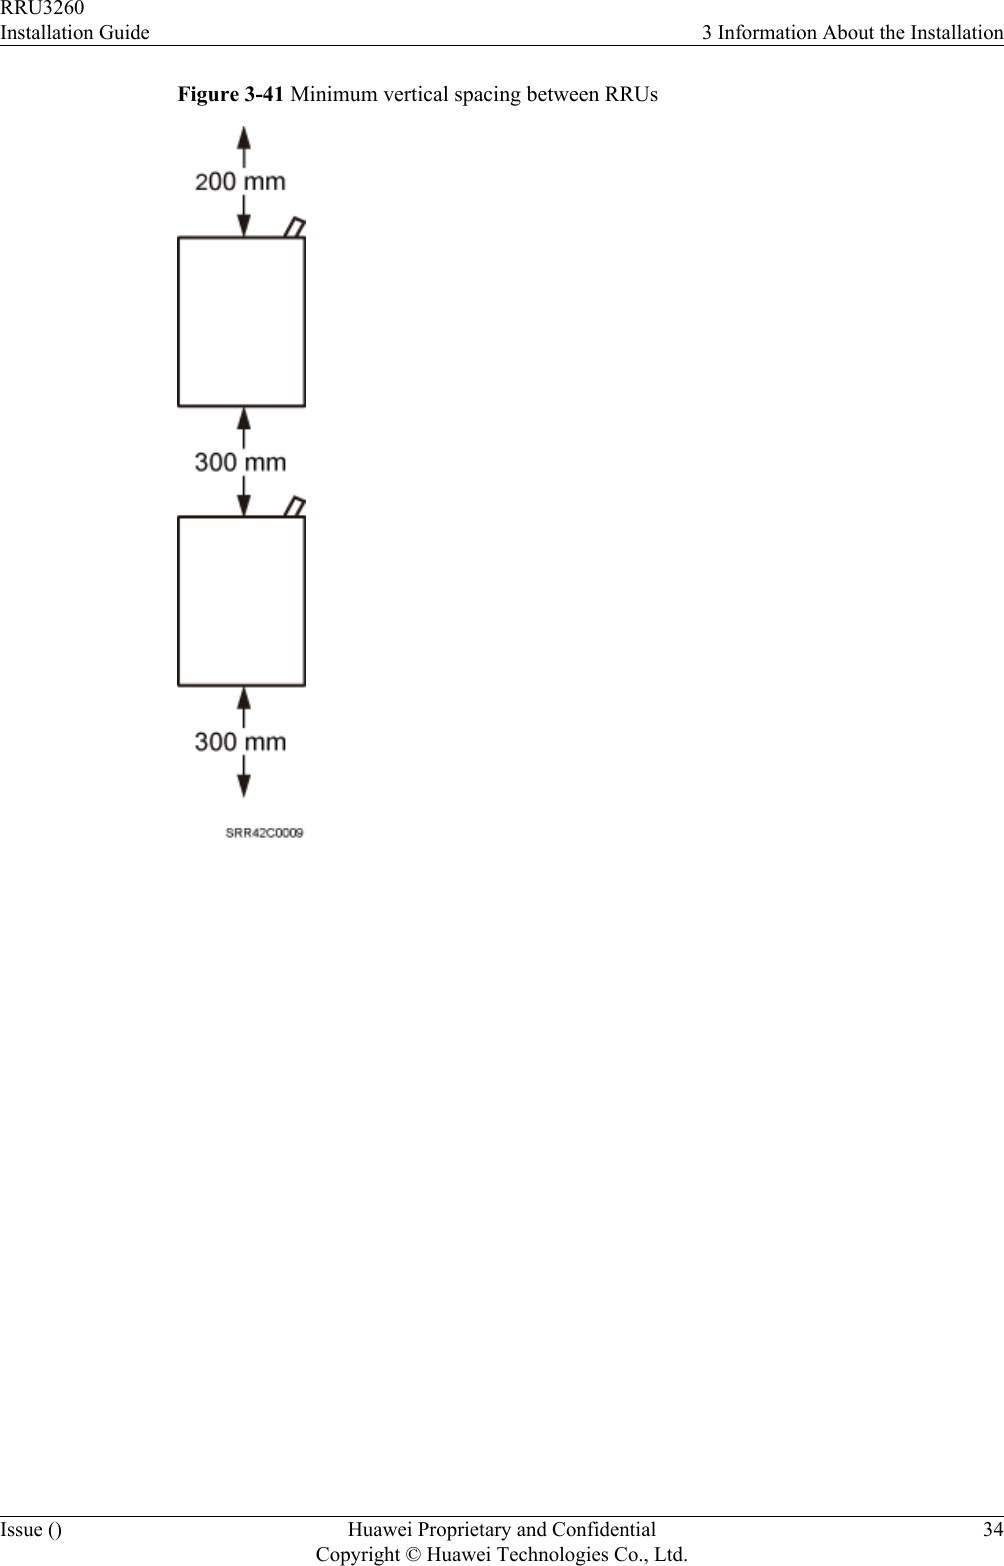 Figure 3-41 Minimum vertical spacing between RRUsRRU3260Installation Guide 3 Information About the InstallationIssue () Huawei Proprietary and ConfidentialCopyright © Huawei Technologies Co., Ltd.34